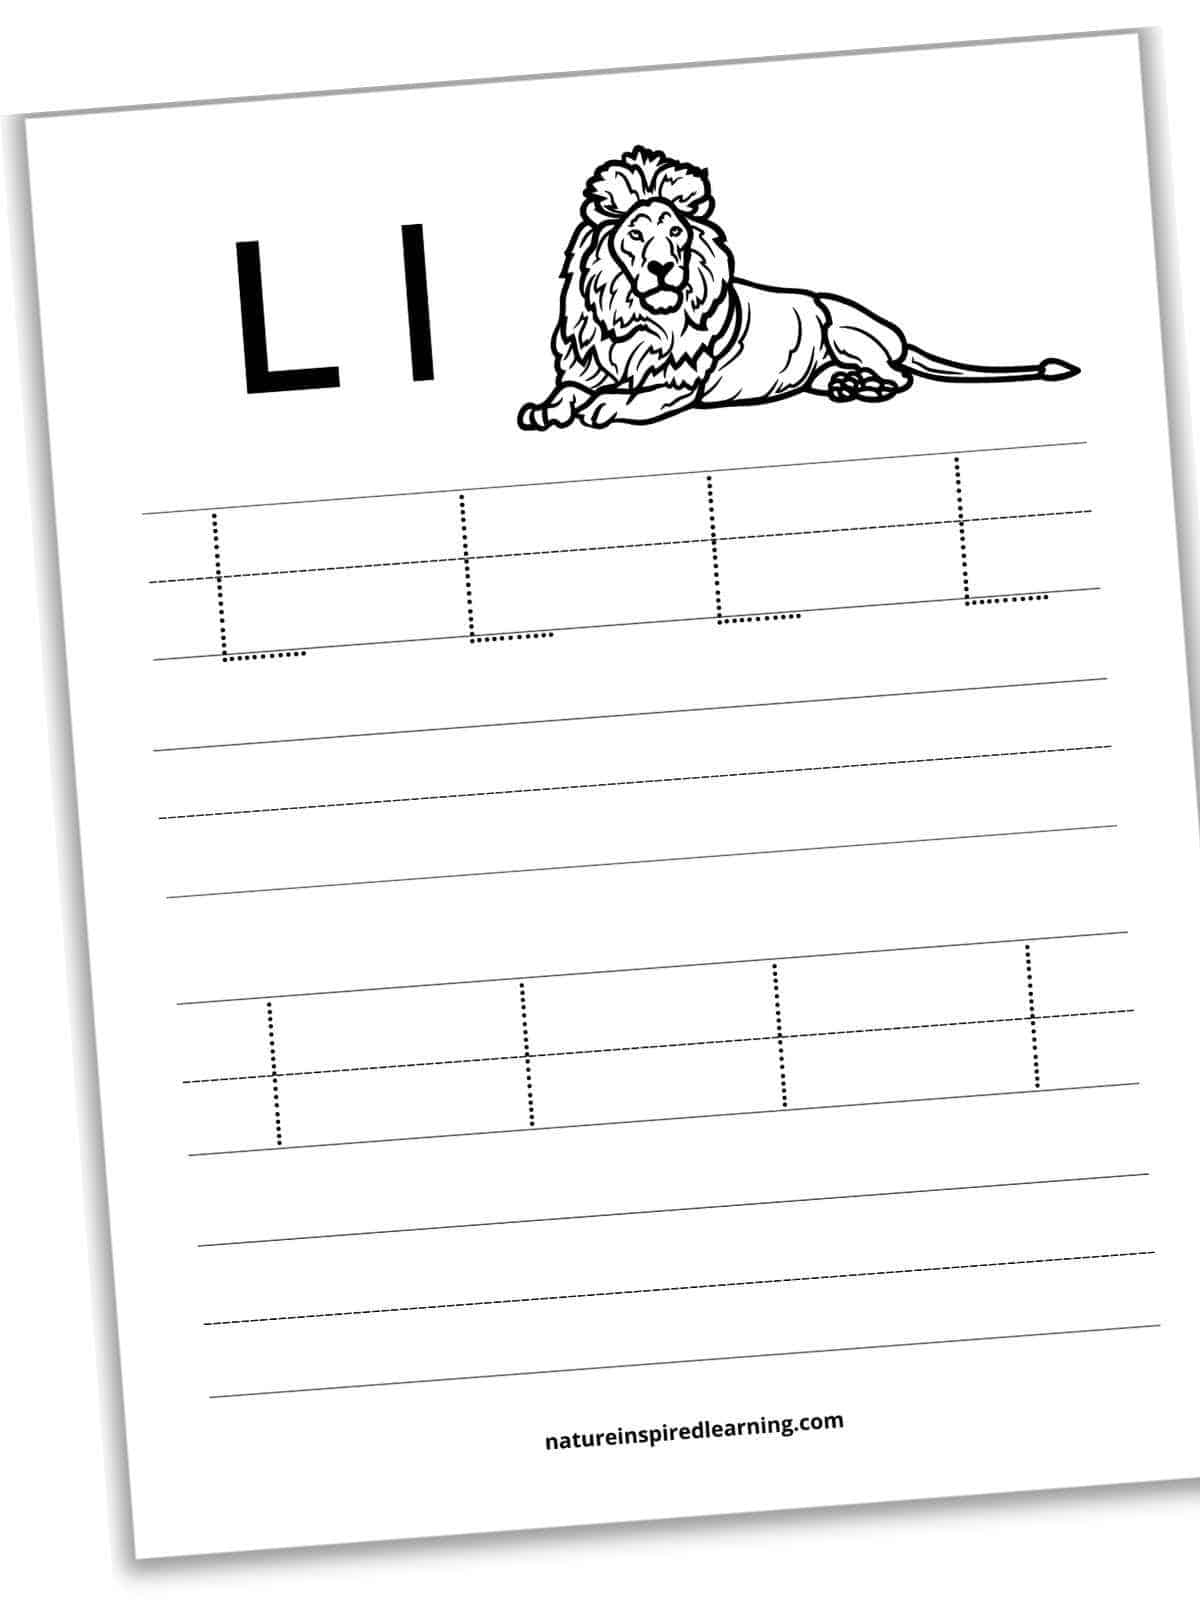 L l in bold next to a black and white lion laying down with a mane. Four sets of lines, one with four dotted L's, one blank set, one with four dotted l's and one black set across bottom.